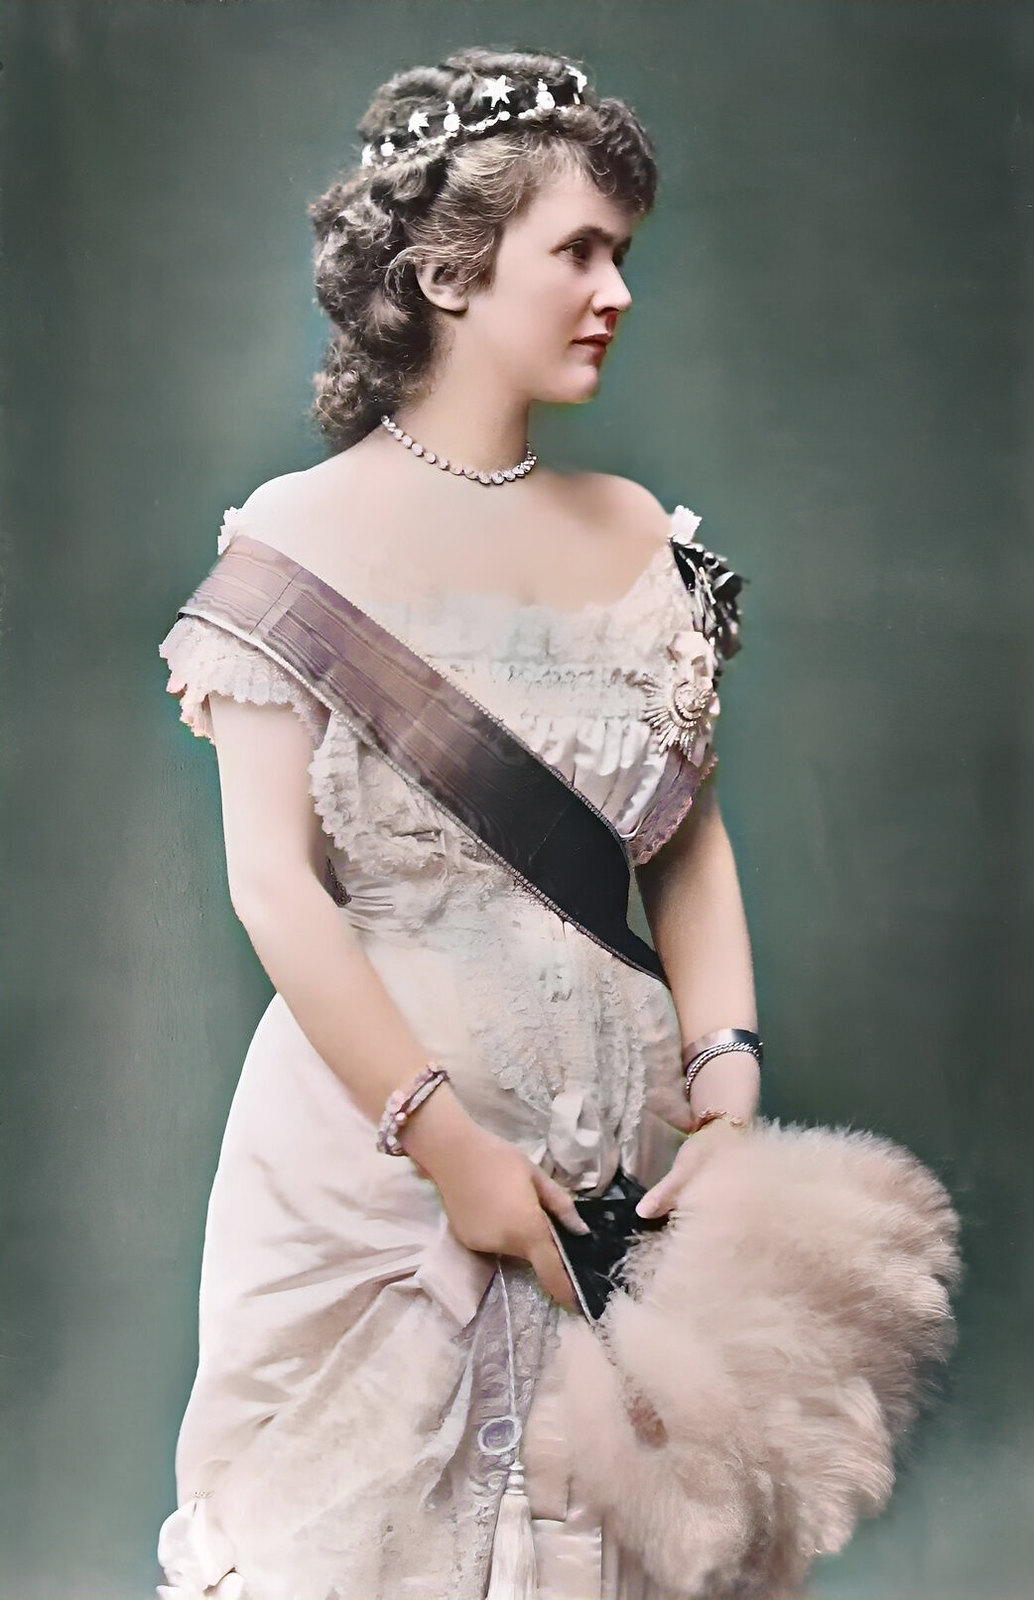 Elizabeth, Queen of Romania, holding a feather fan and wearing a Sash and insignia, a diamond necklace and a small head band, 1881